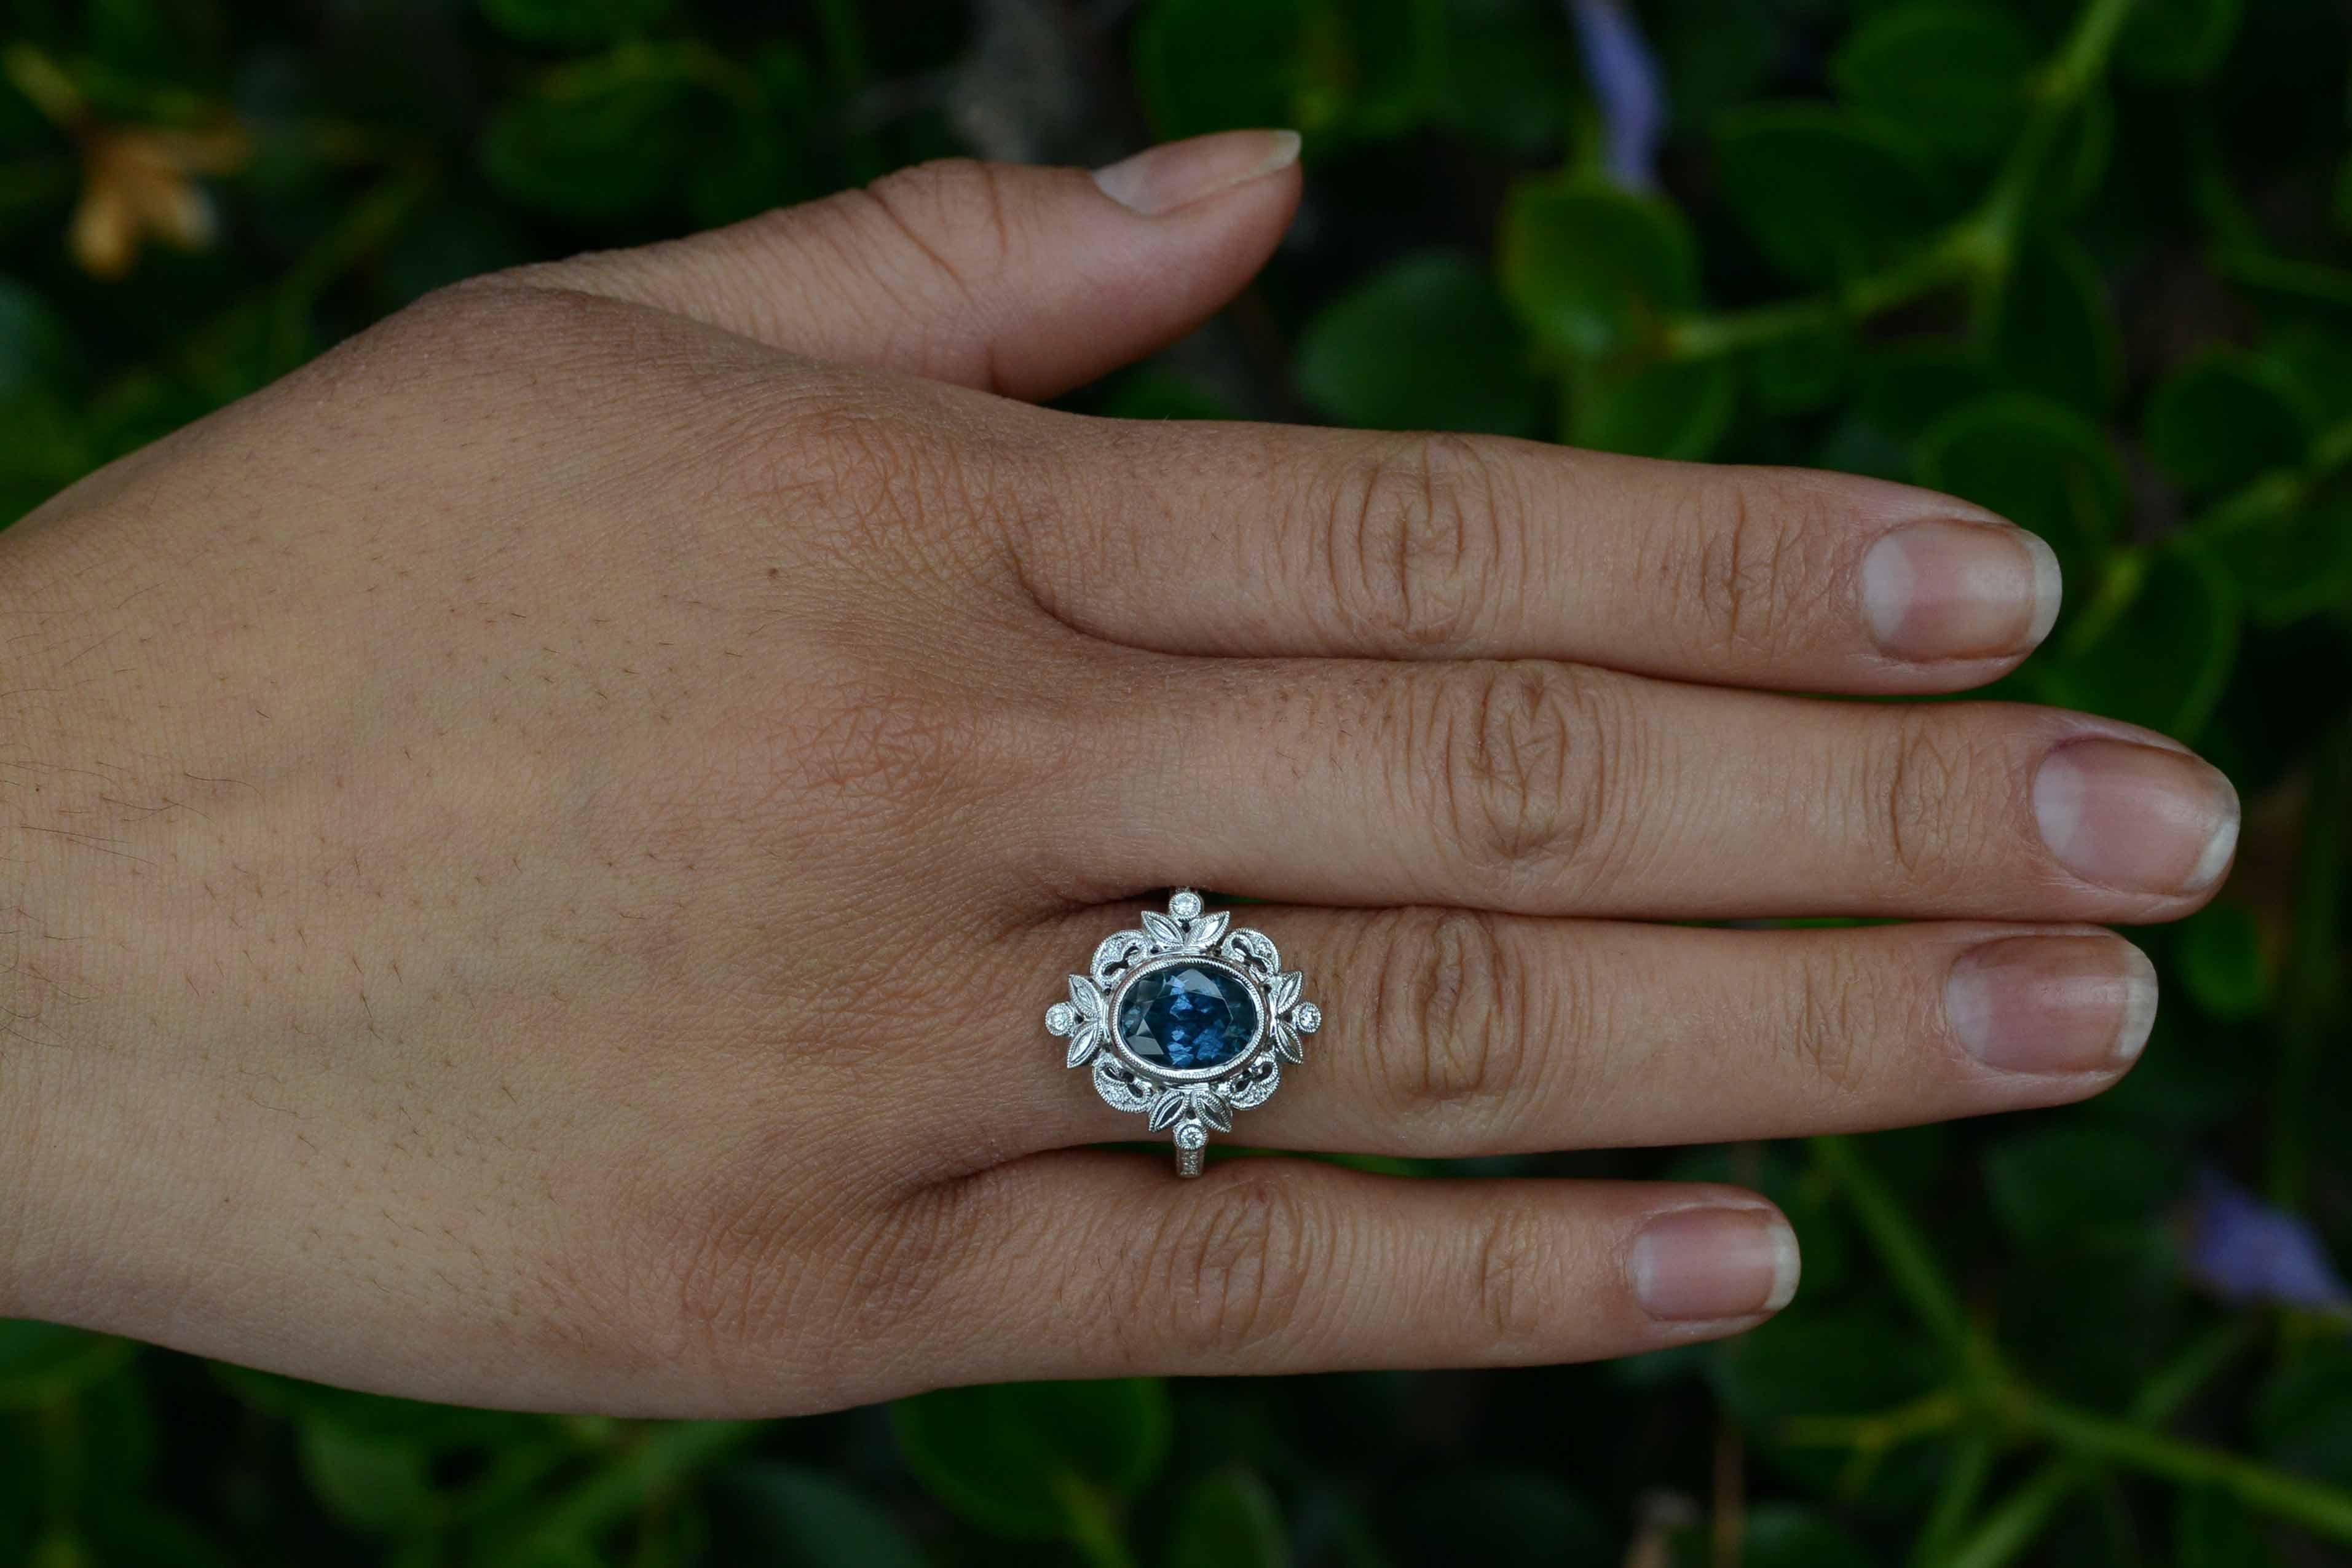 Centering on large, 2.79 oval Montana sapphire having an alluring, teal greenish-blue tone that is oh-so-velvety & rich, mounted in a most romantic Edwardian or Art Nouveau style floral diamond halo. This beautiful gem was discovered in a local